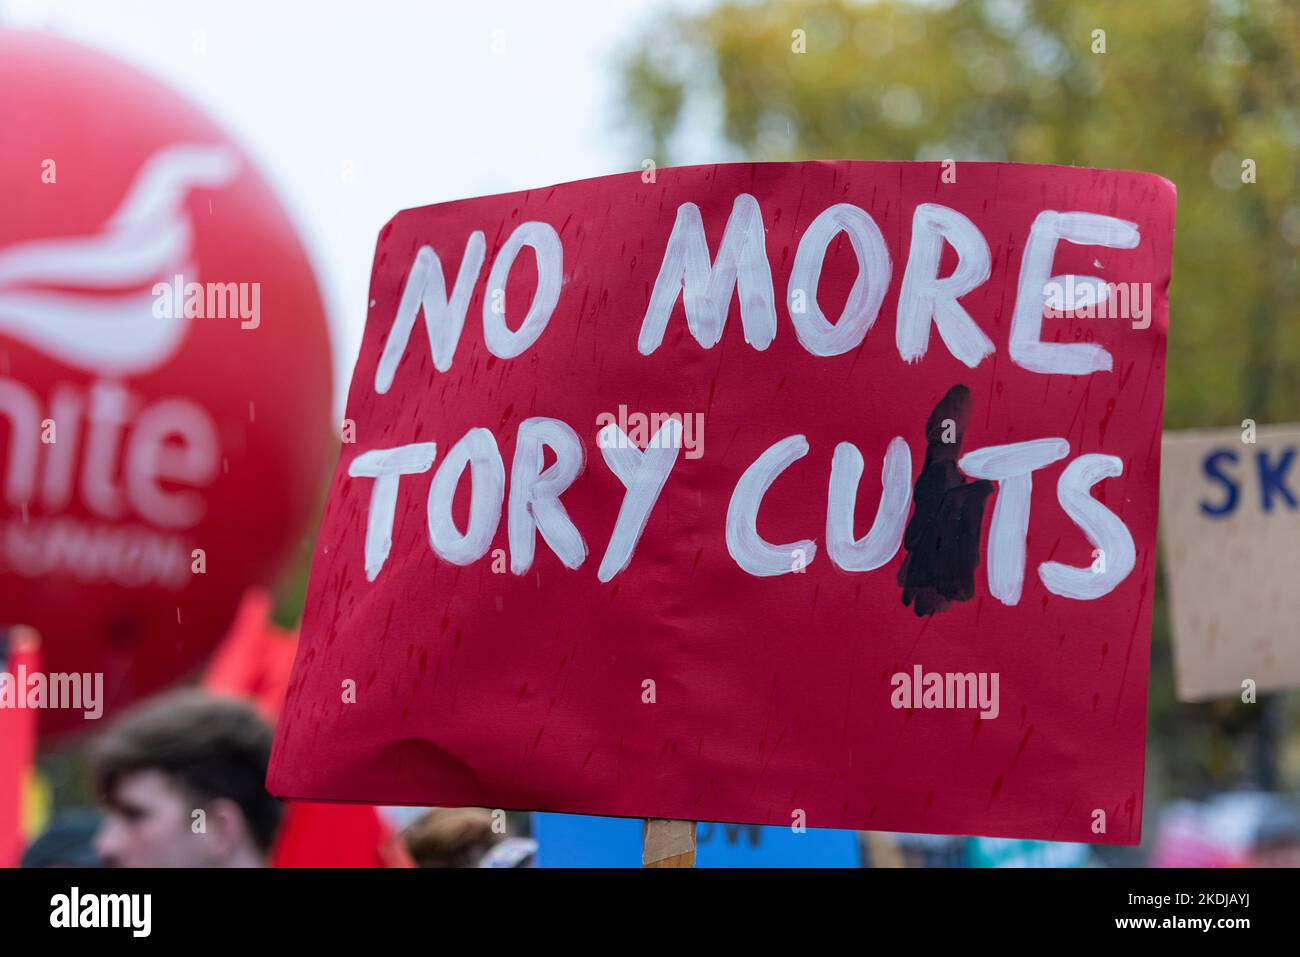 No more Tory cuts sign at a protest in London against Conservative government austerity measures, calling for a general election and higher wages. Stock Photo